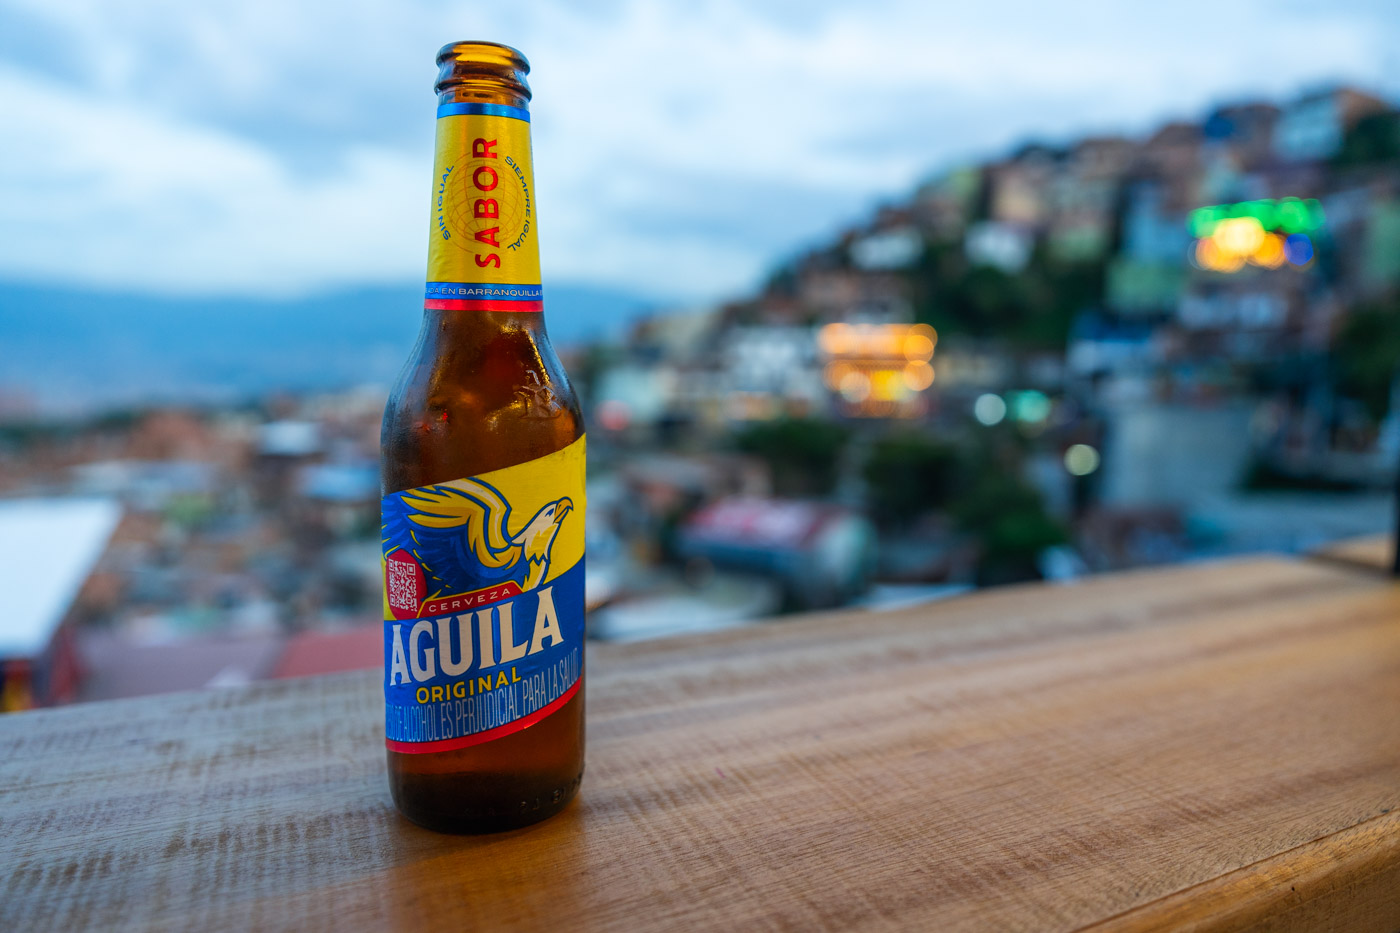 A bottle of Aguila beer, a local Colombian lager, in Comuna 13.